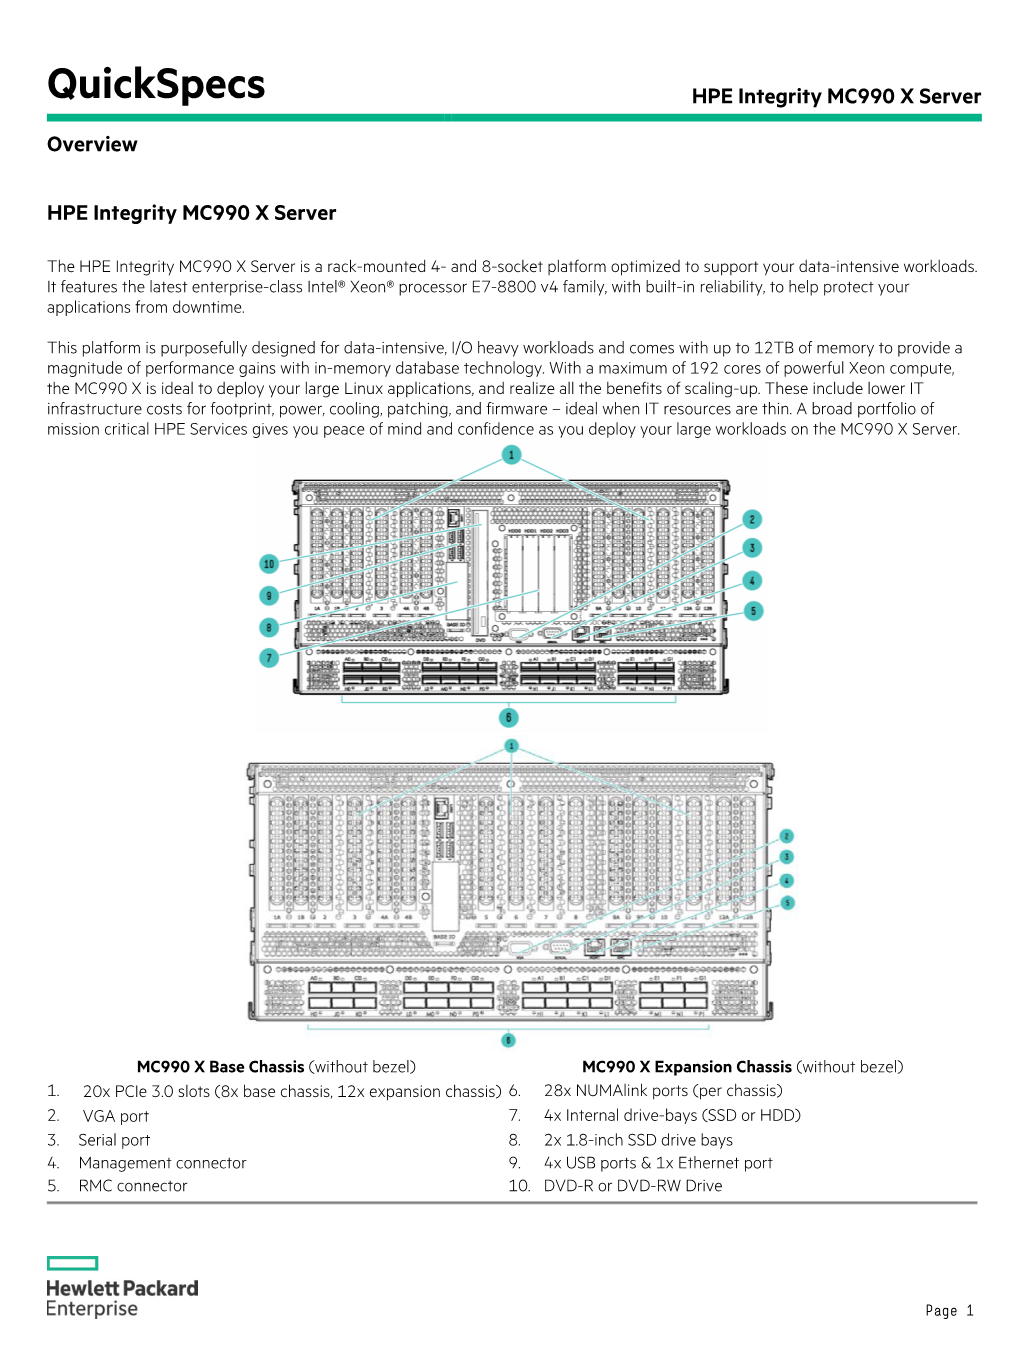 HPE Integrity MC990 X Server Overview